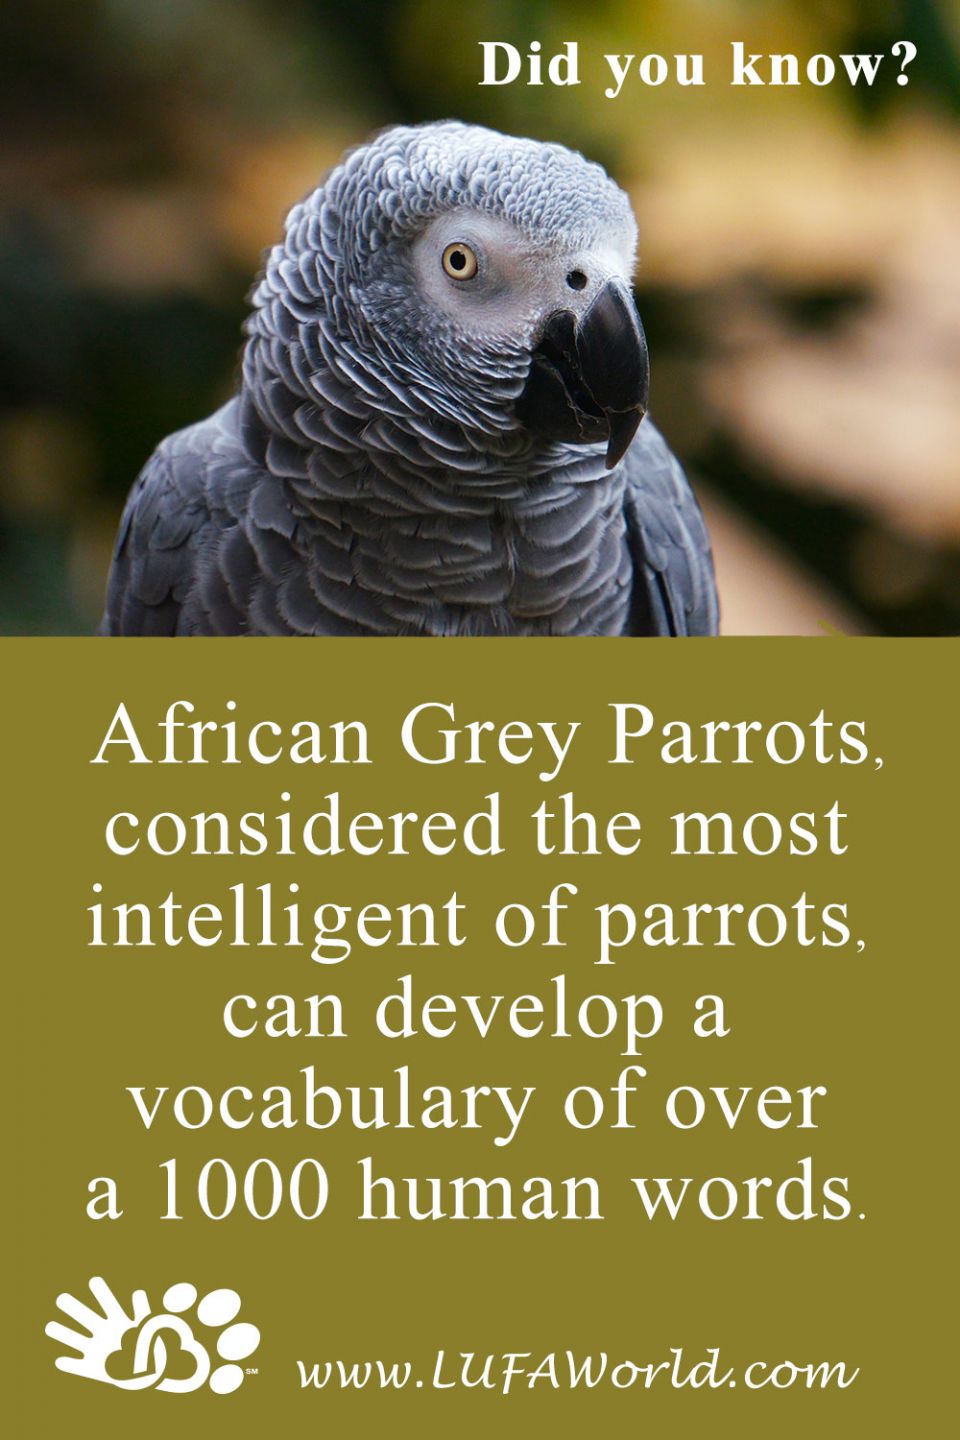 #DidYouKnow  African Grey Parrots, considered the most, intelligent of parrots, can develop a vocabulary of over a 1000 human words. #BirdsOfAFeather